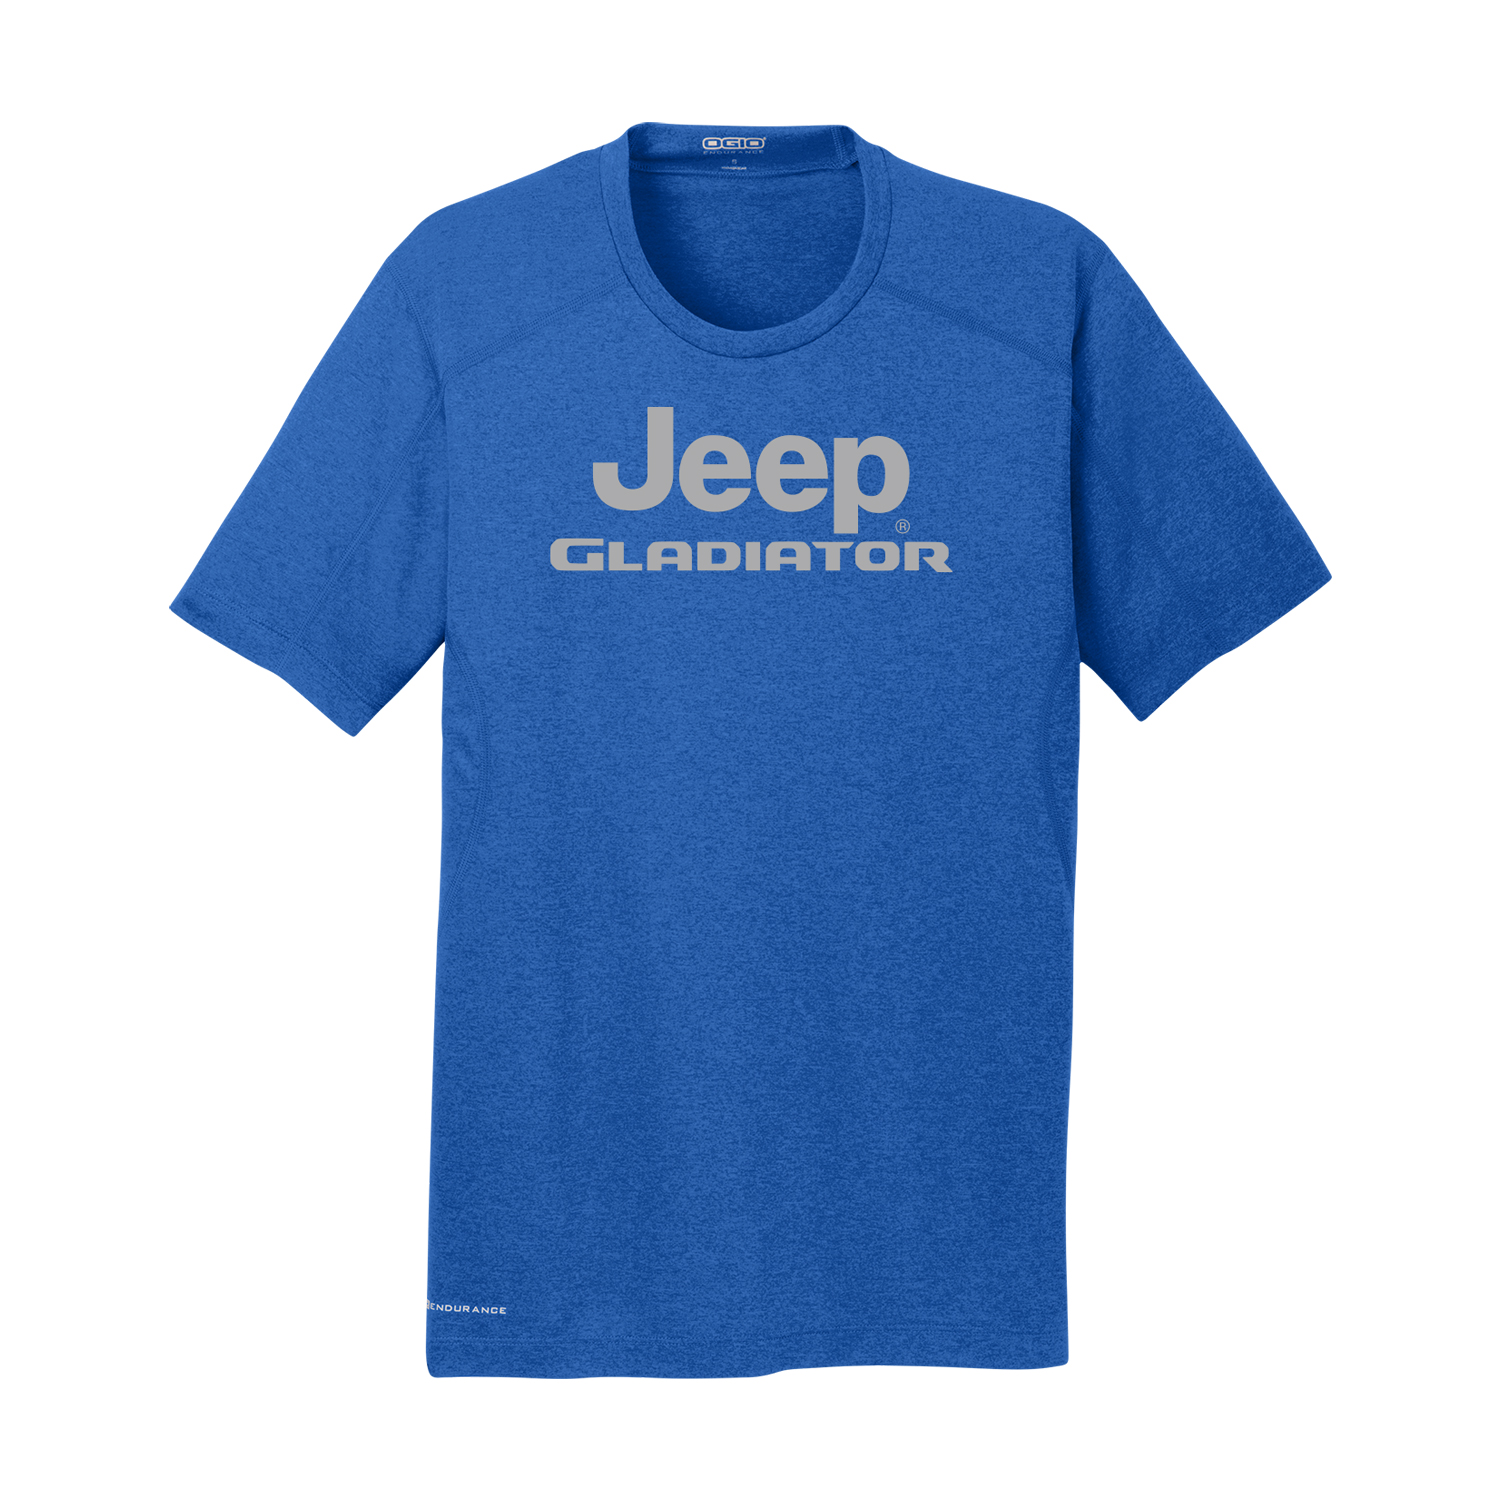 Gladiator - Collections - Jeep - Jeep Gear